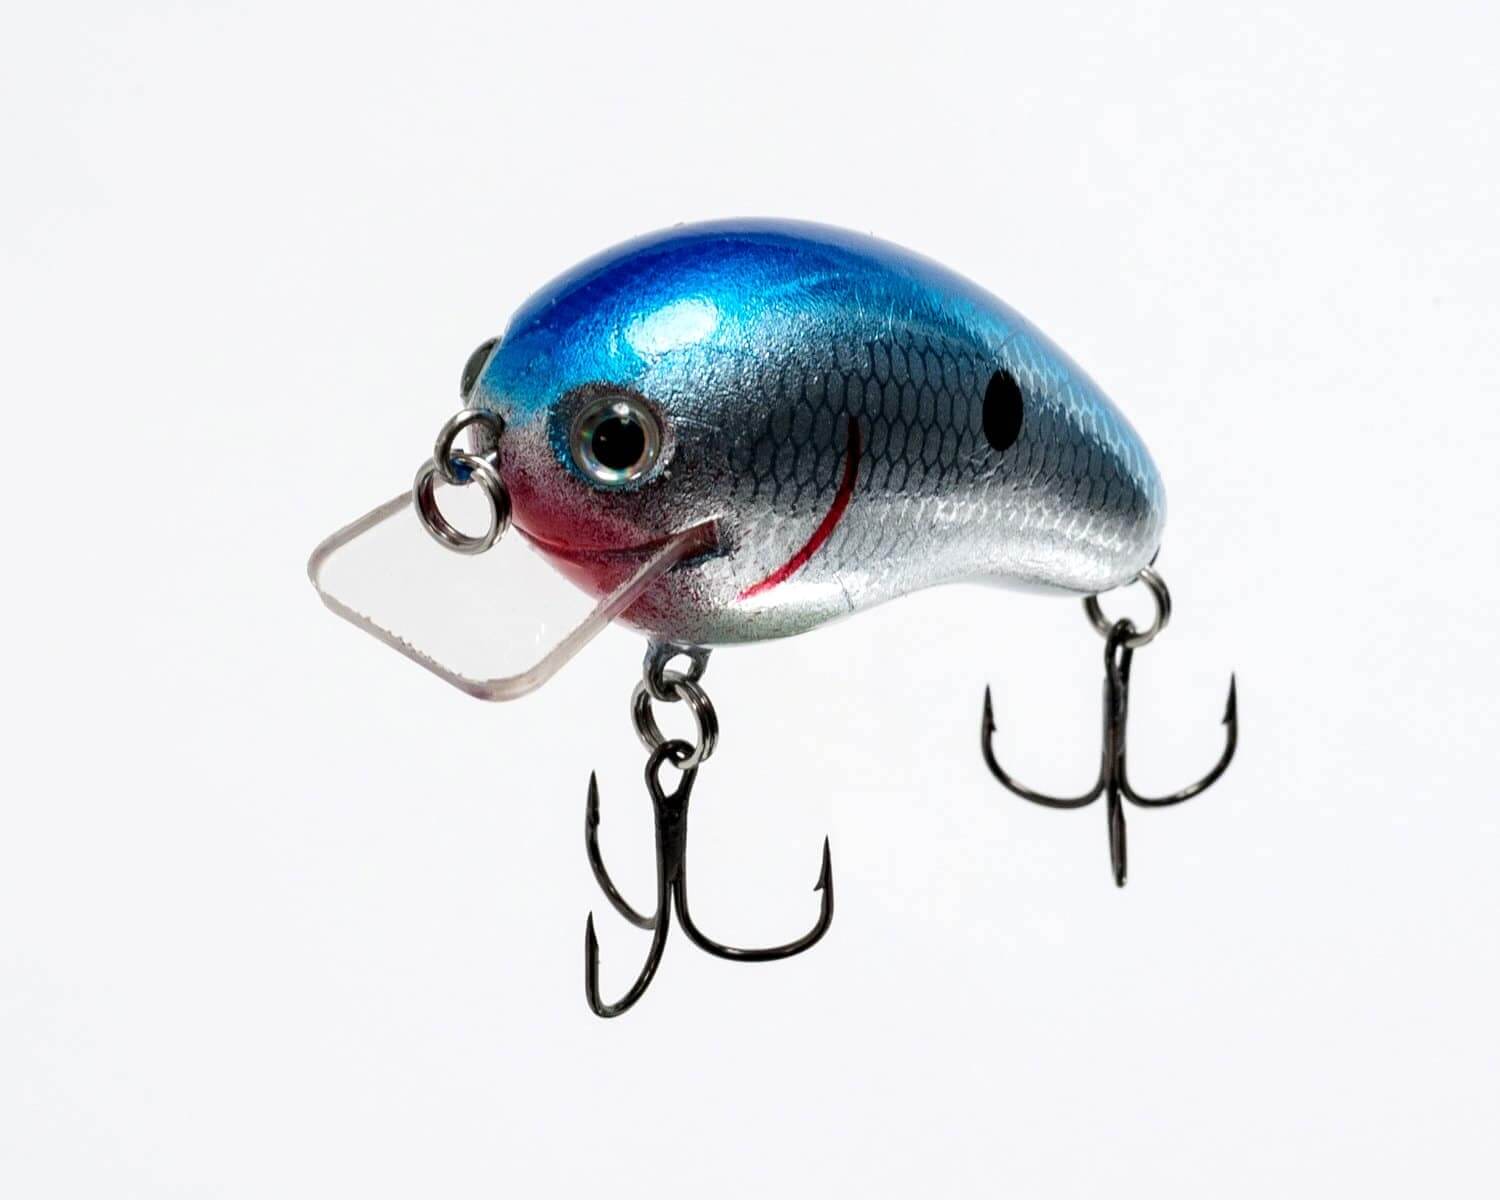 Fishing Lures, Hard Suspending Fish Bait Lures Floating Pencil Bass Bait  with Treble Hooks for Bass Trout Walleye, Floating Lures -  Canada